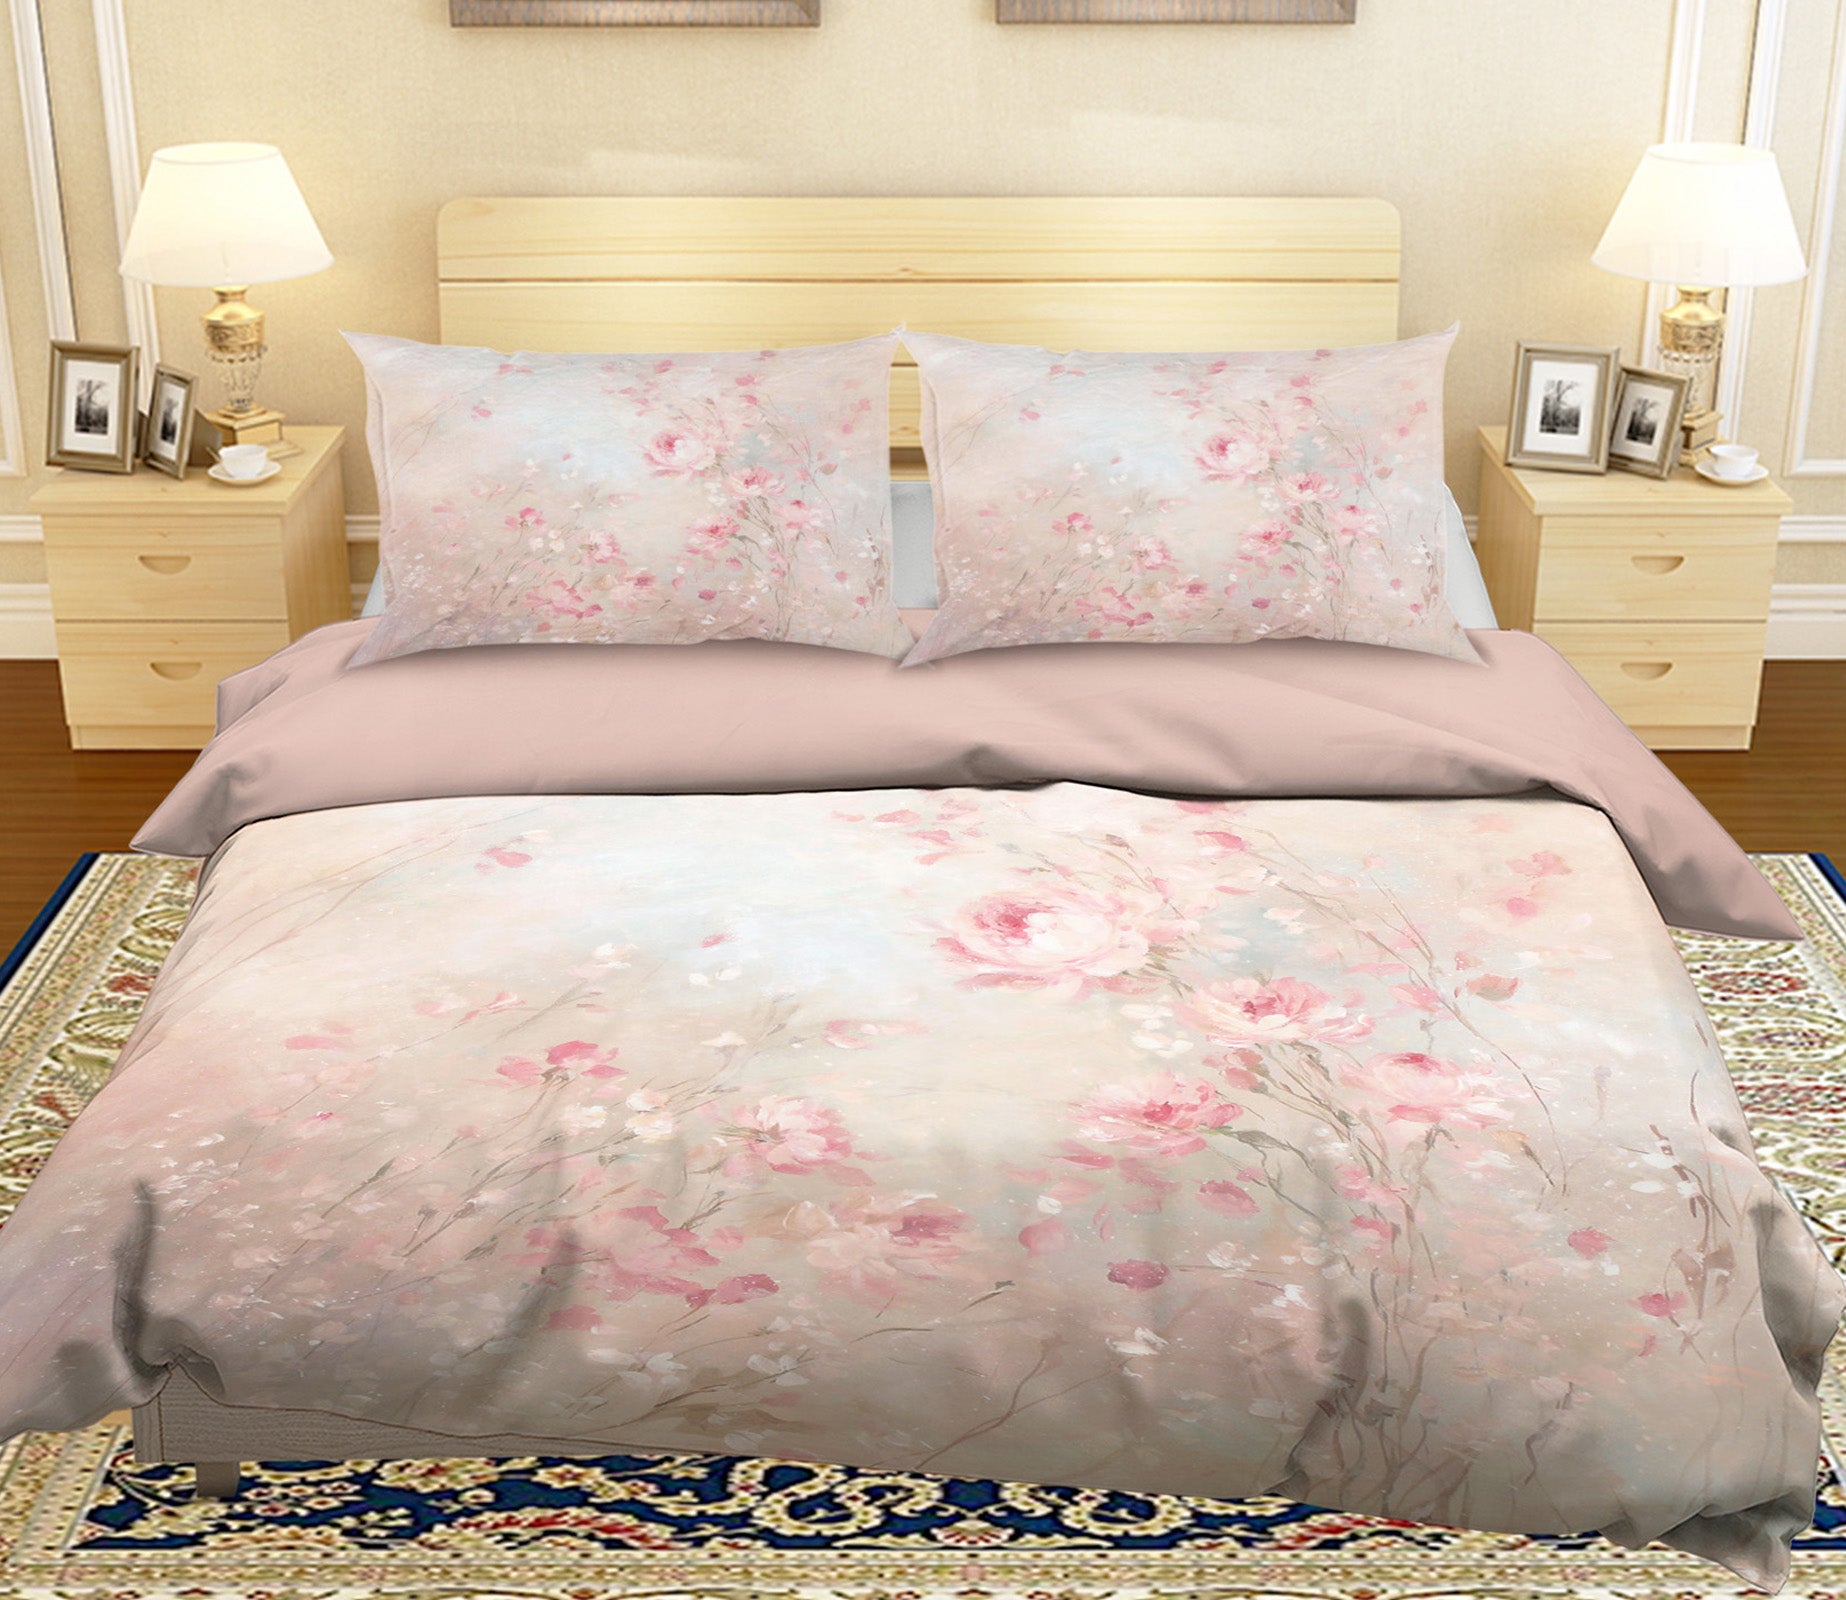 3D Pink Rose 026 Debi Coules Bedding Bed Pillowcases Quilt